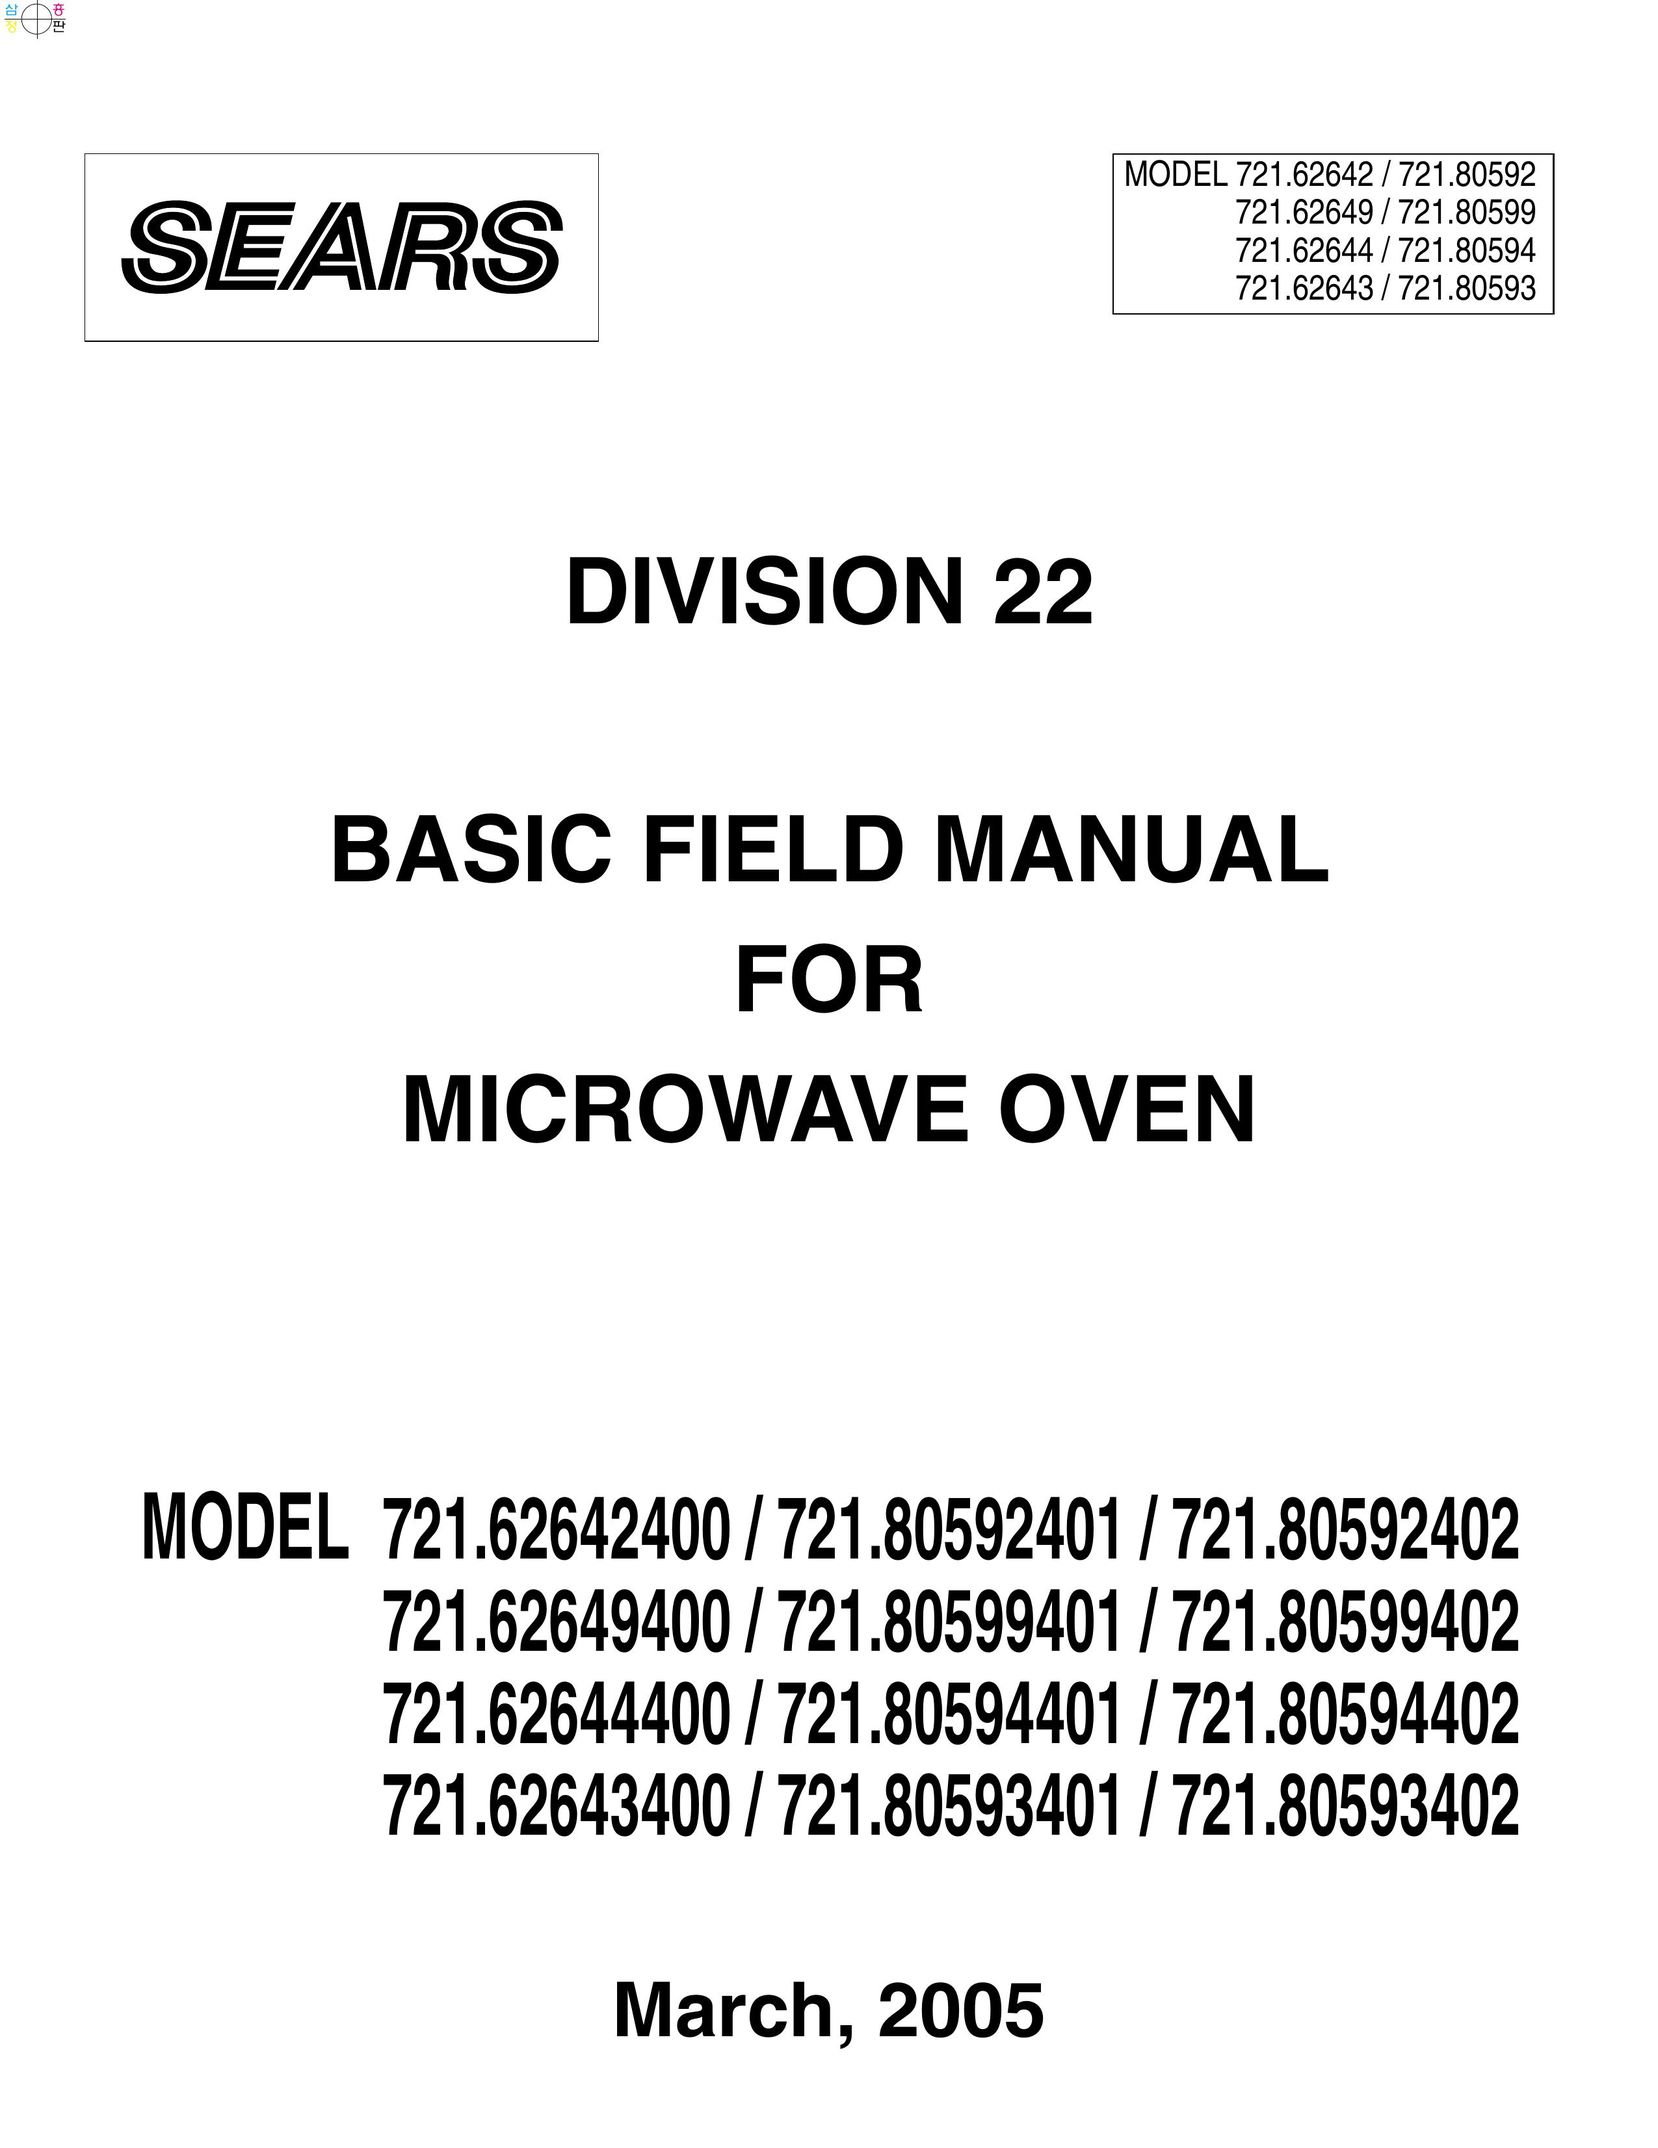 Kenmore 721.626494 Microwave Oven User Manual